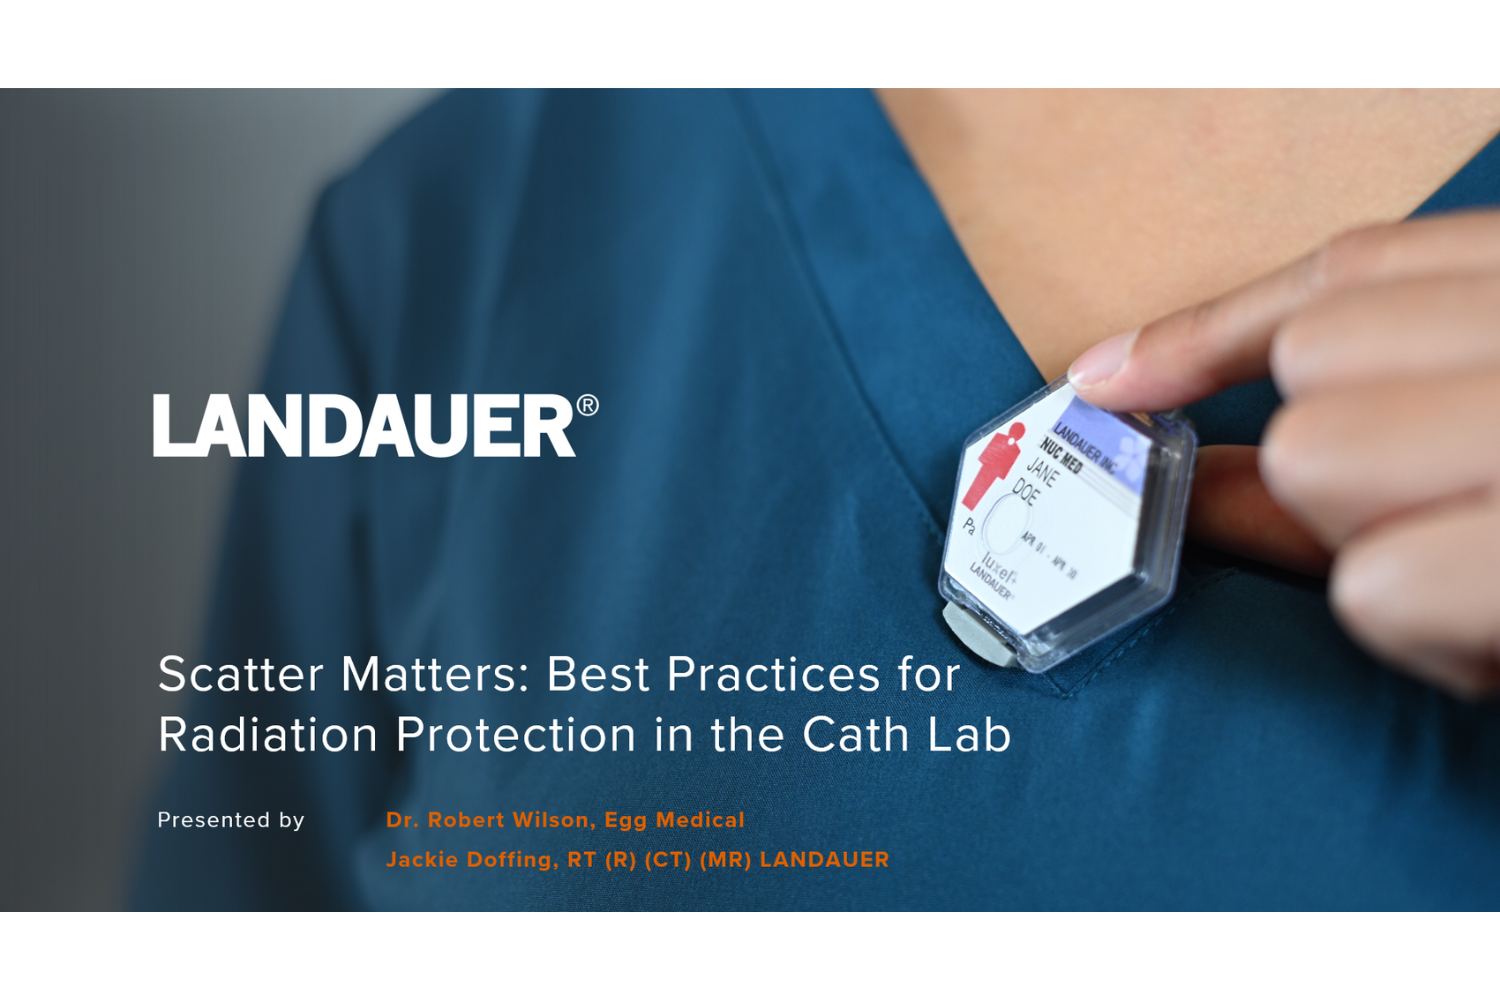 Best Practices for Radiation Protection in the Cath Lab